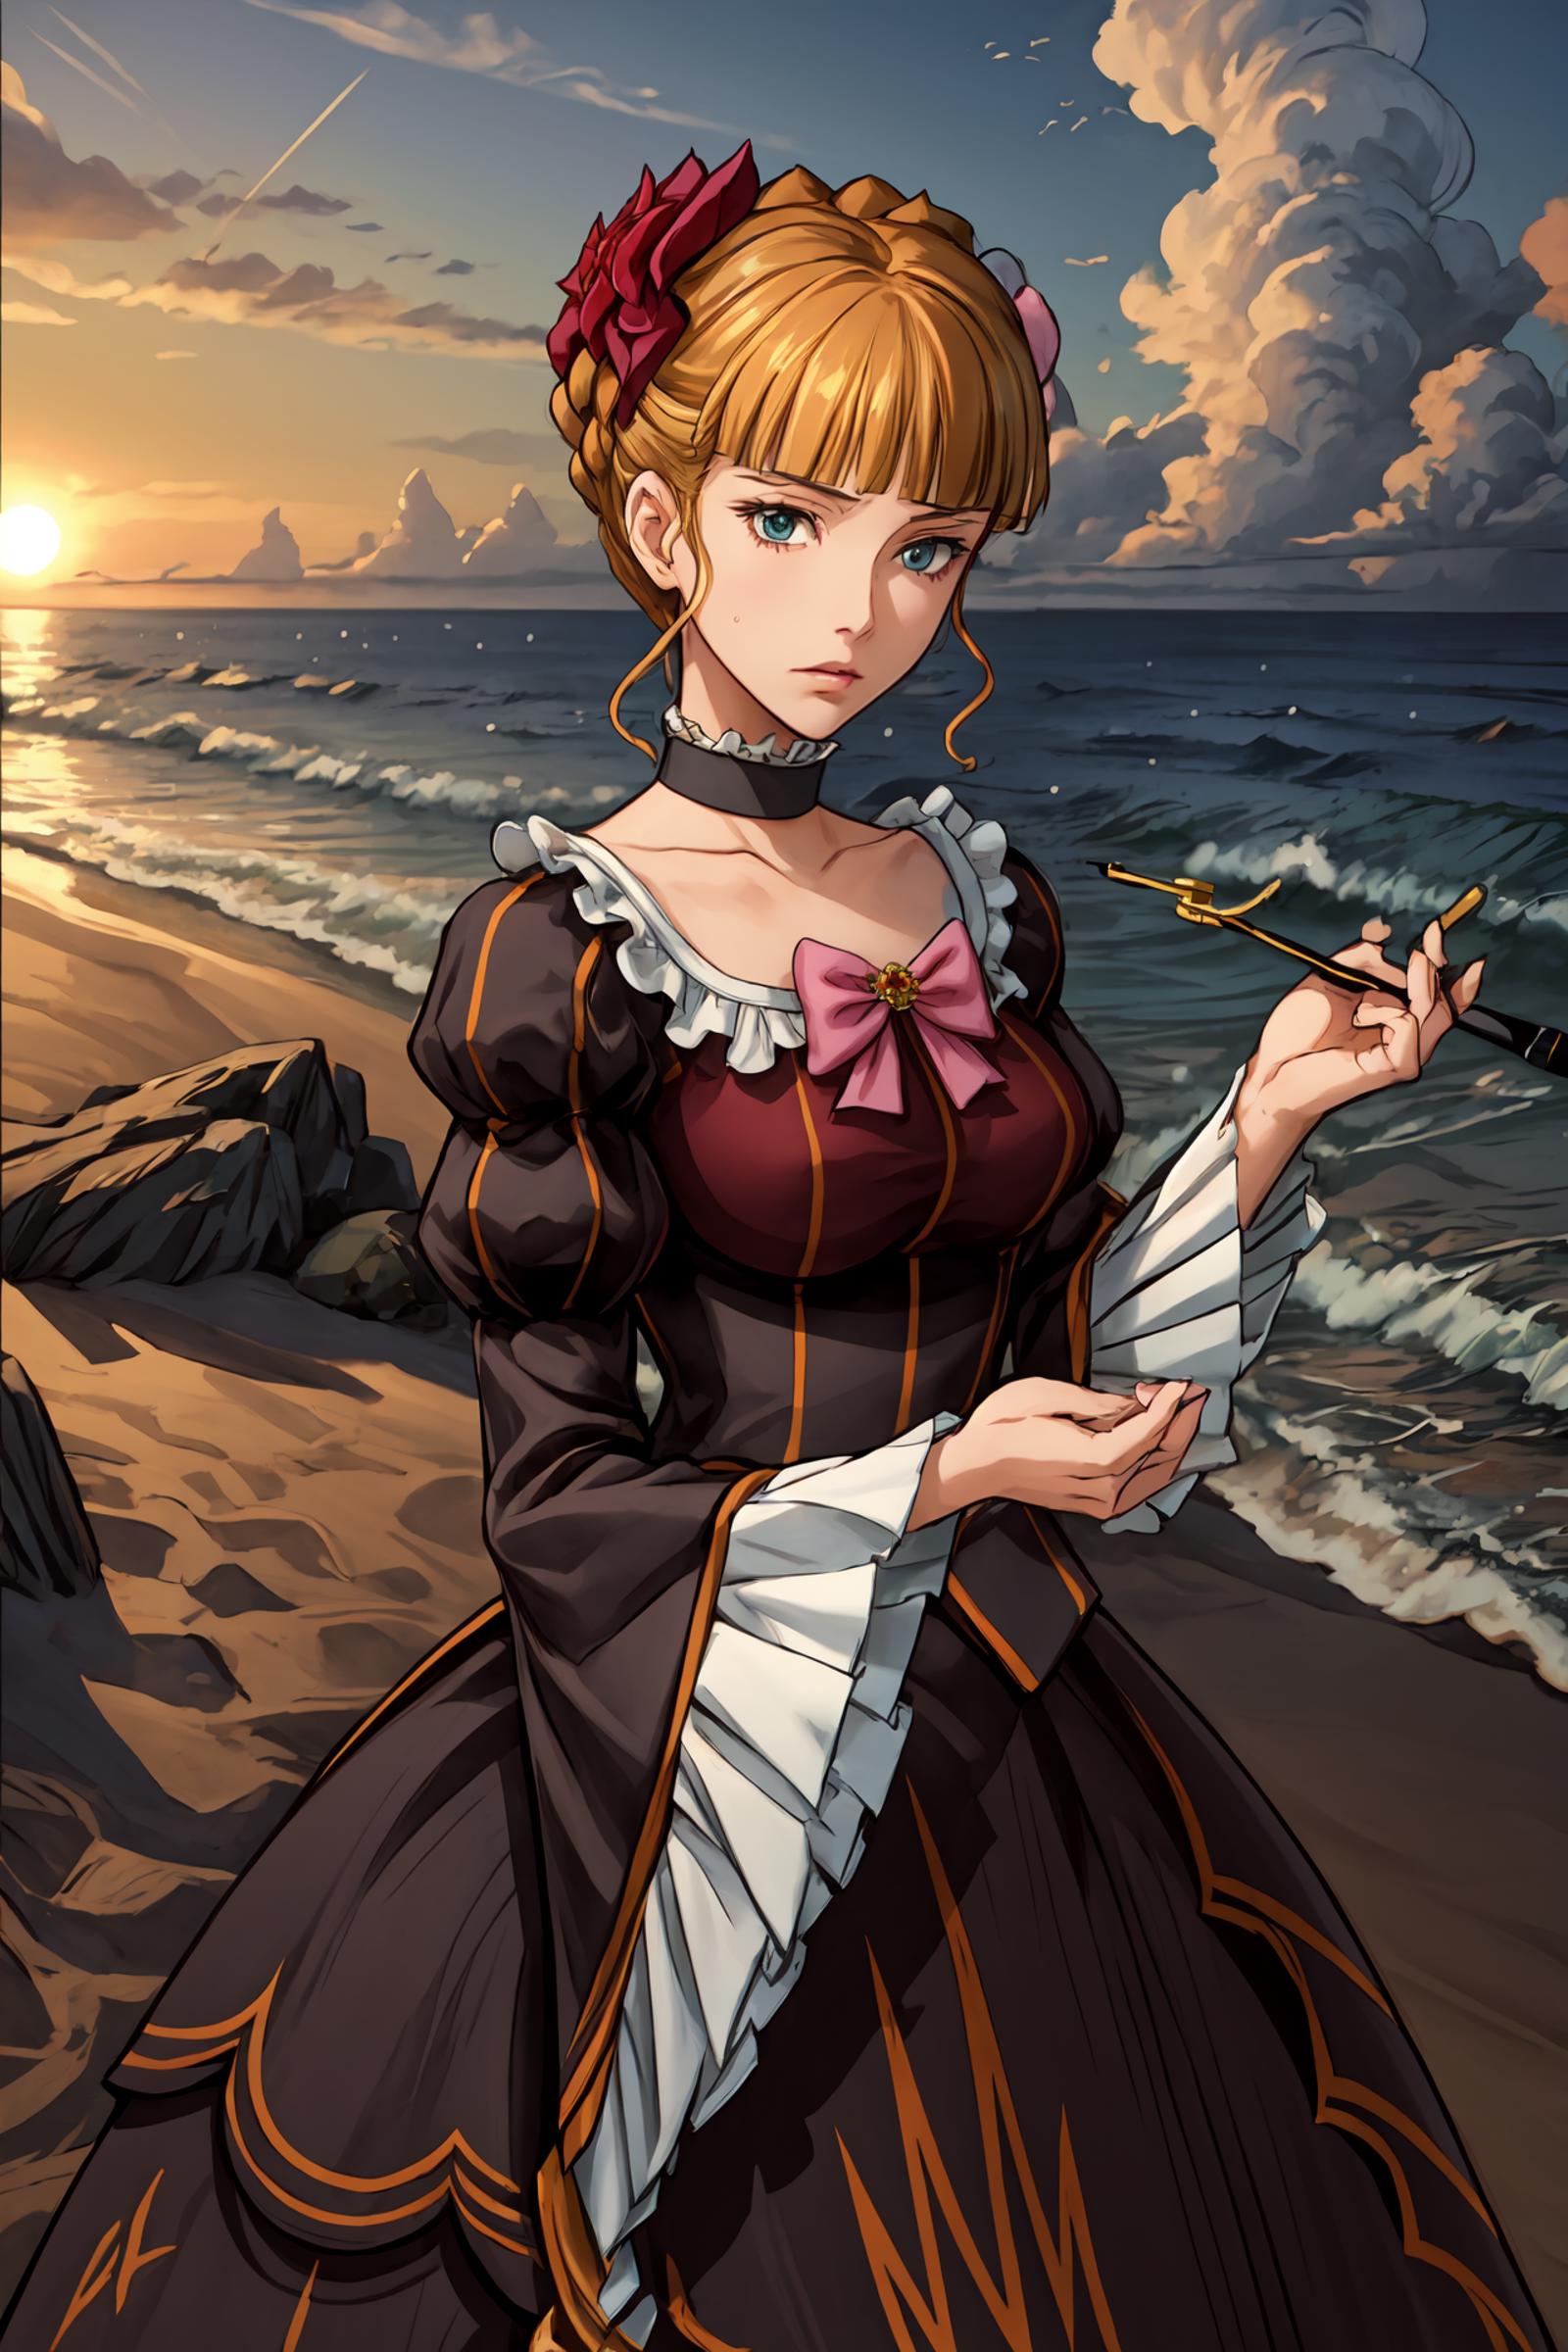 Beatrice (Umineko When They Cry) image by SOSDAN